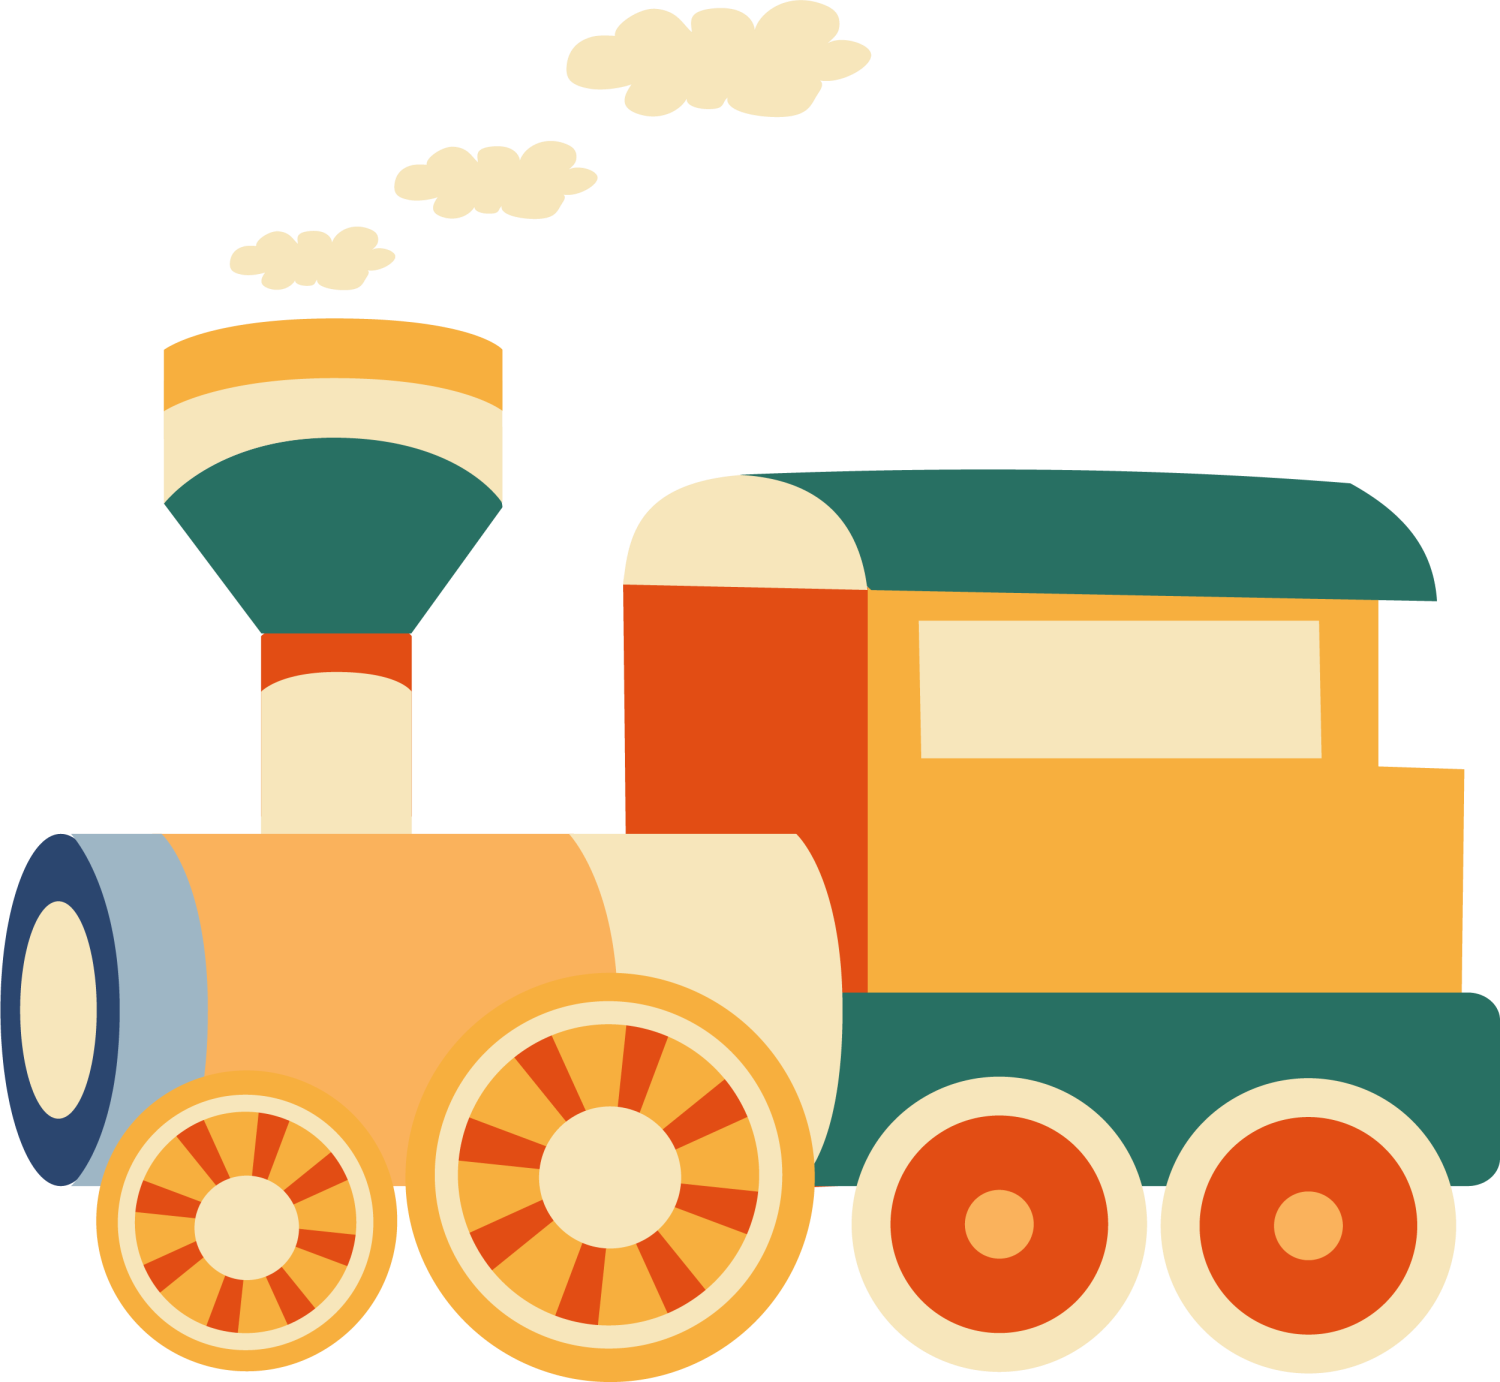 Children's Drawing Of A Train. Cartoon Toy Train Vector Illustration.  Royalty Free SVG, Cliparts, Vectors, and Stock Illustration. Image 98608759.